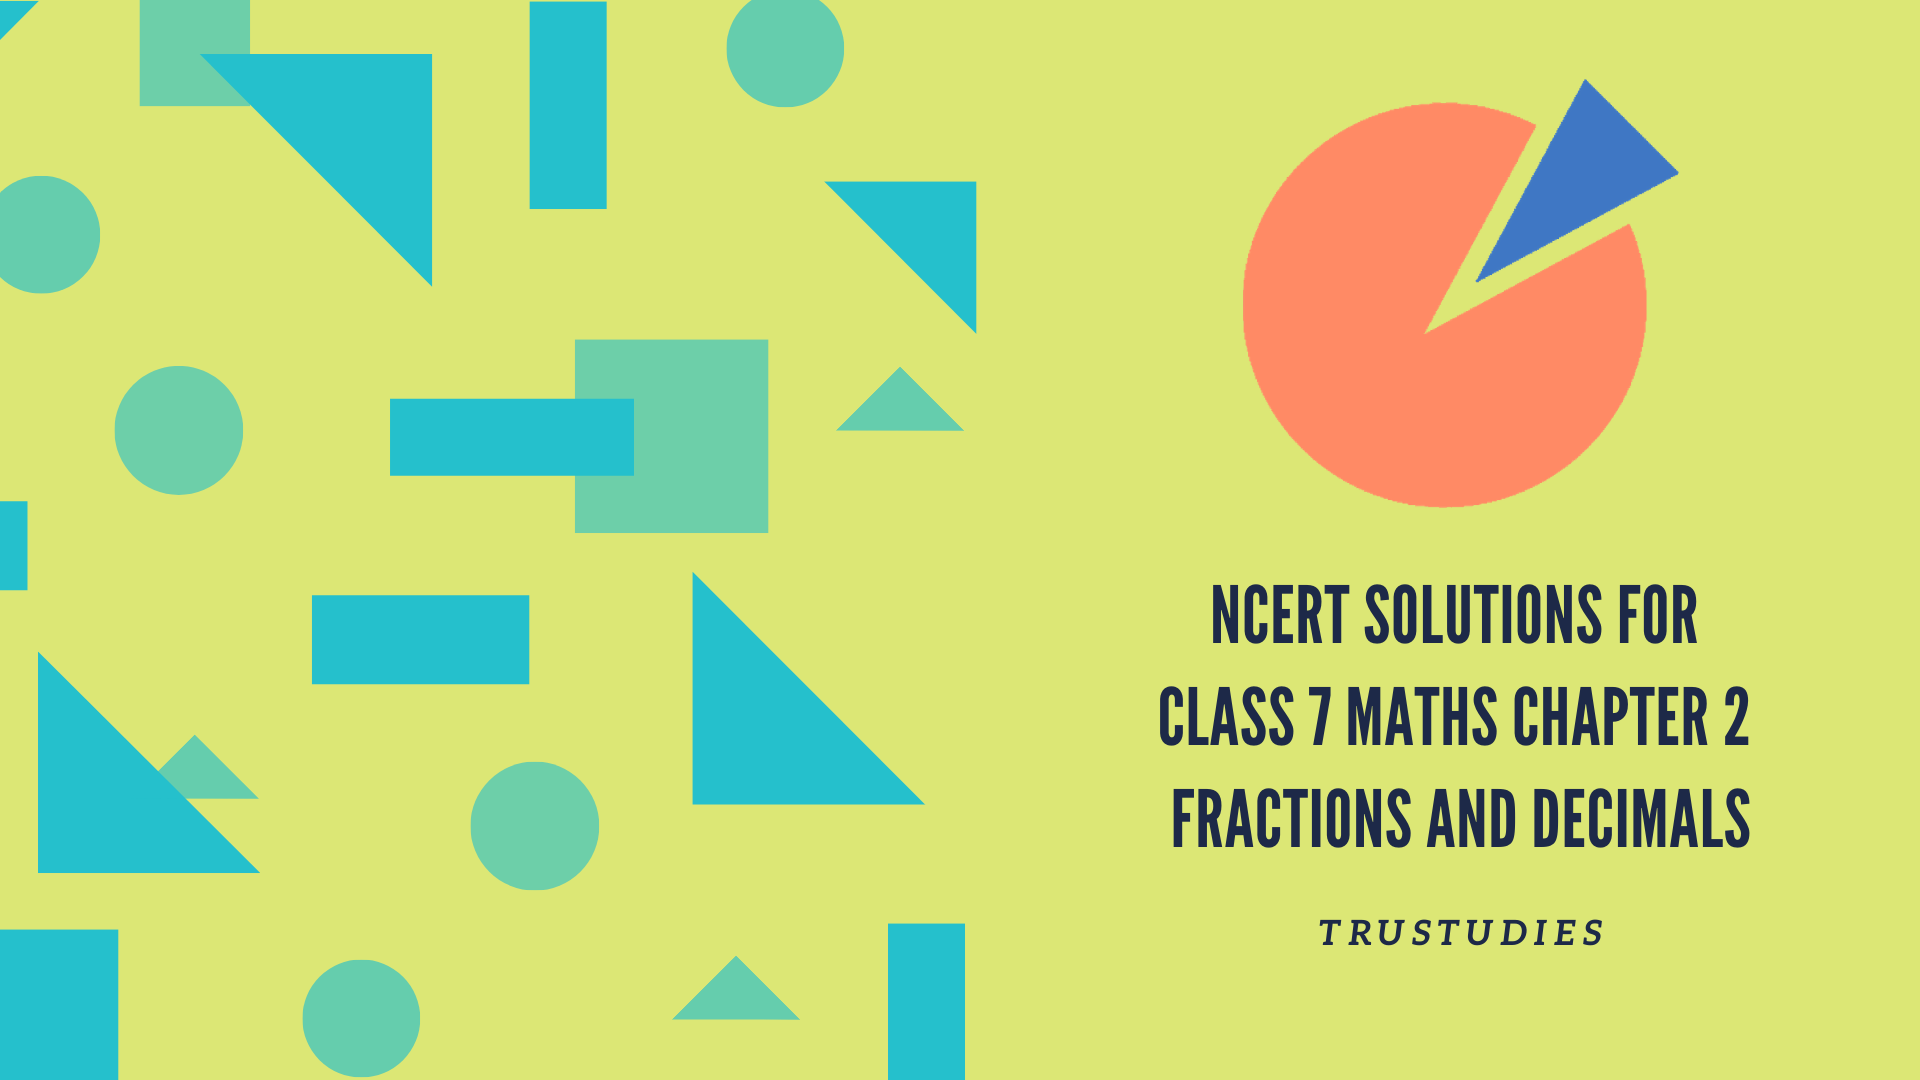 NCERT solutions for class 7 maths chapter 2 fractions and decimals banner image